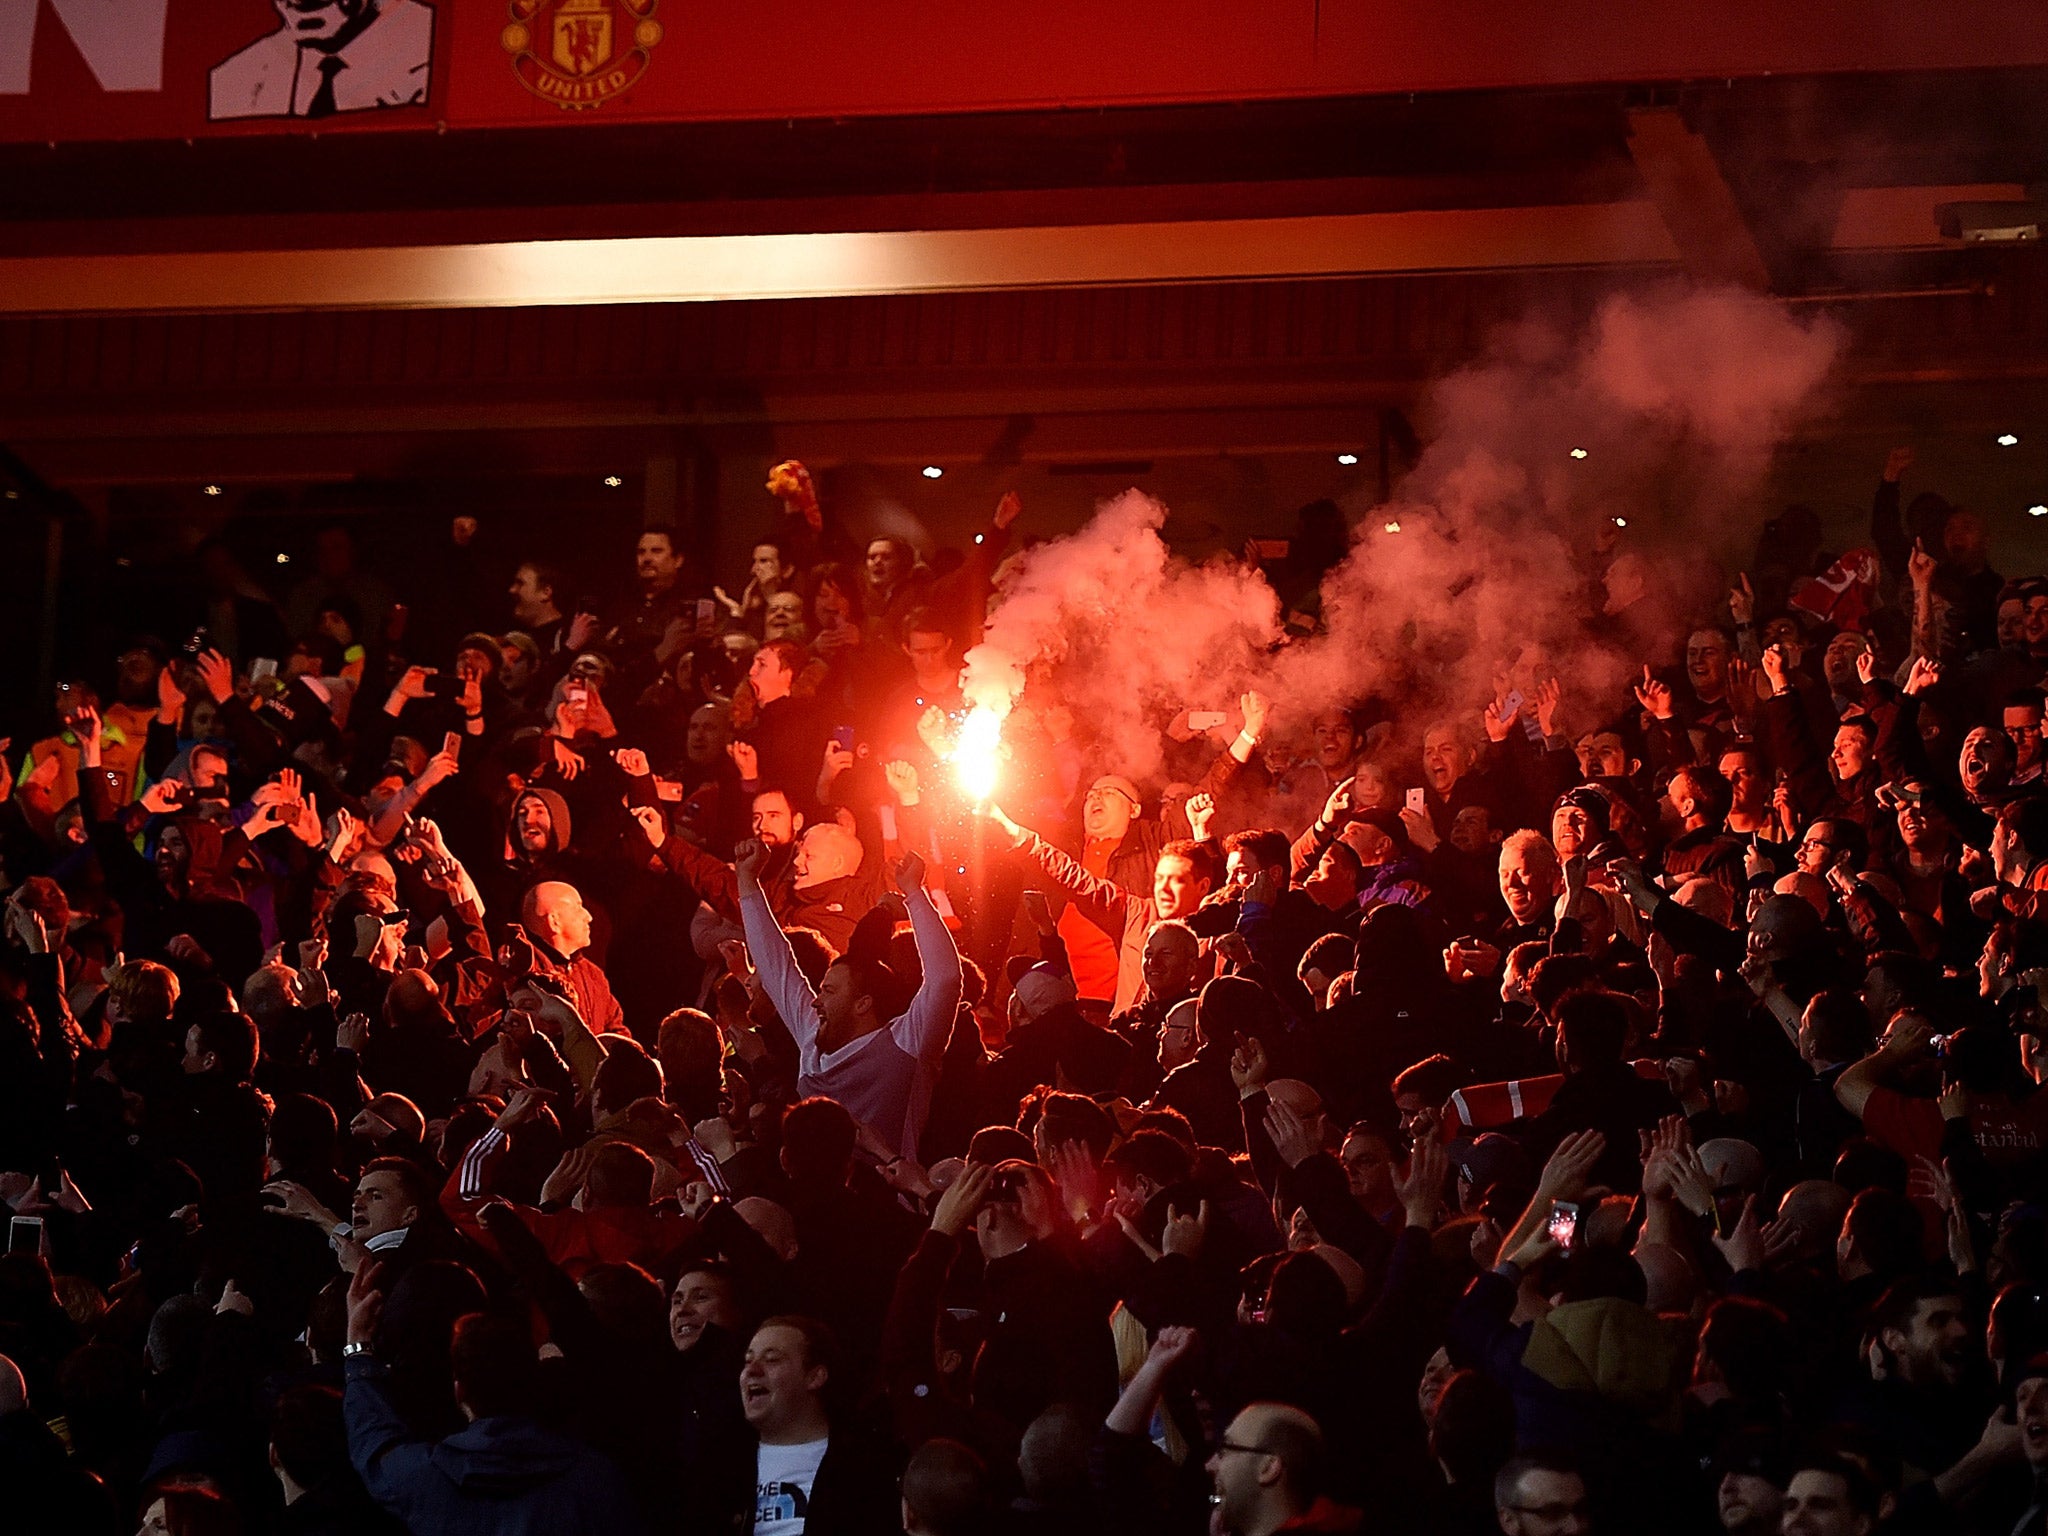 Liverpool fans were charged for lighting fireworks in the Old Trafford stands